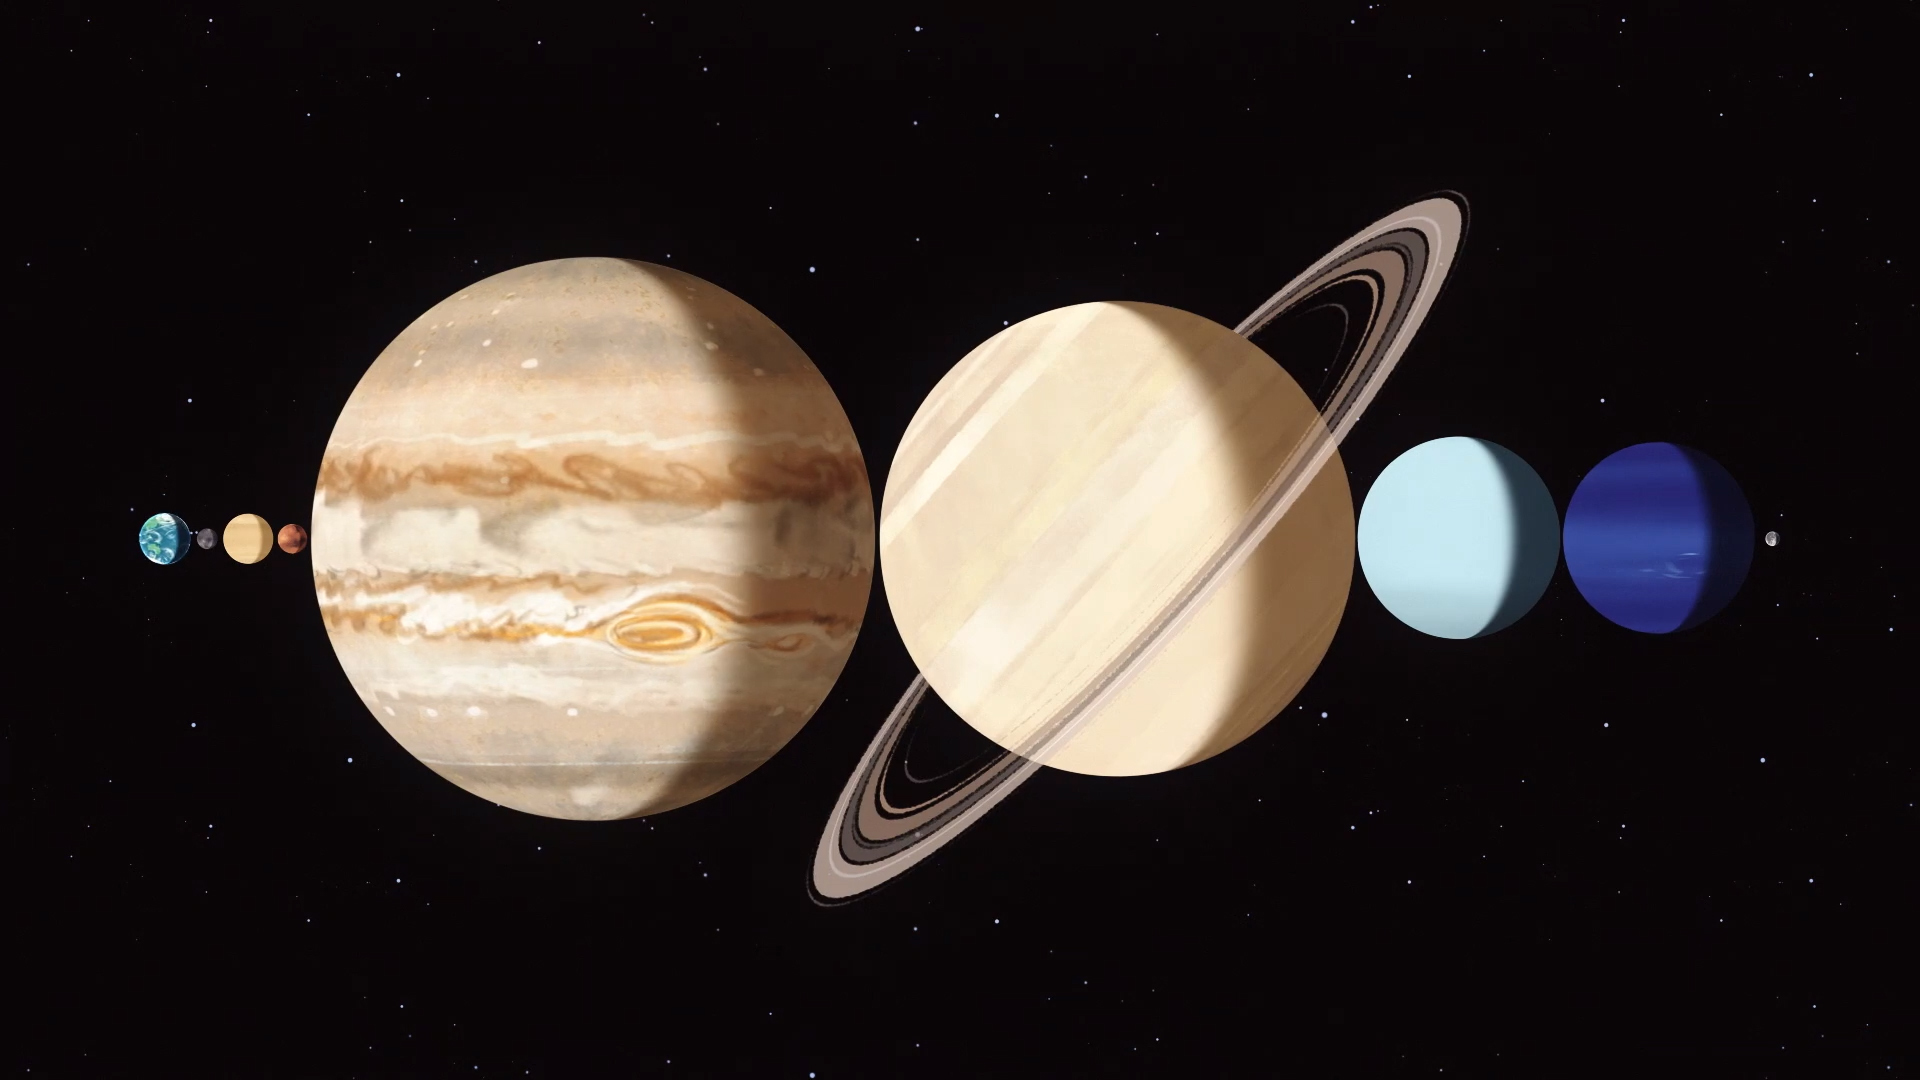 Illustration showing all the major planets together in a line between the Earth and the Moon.